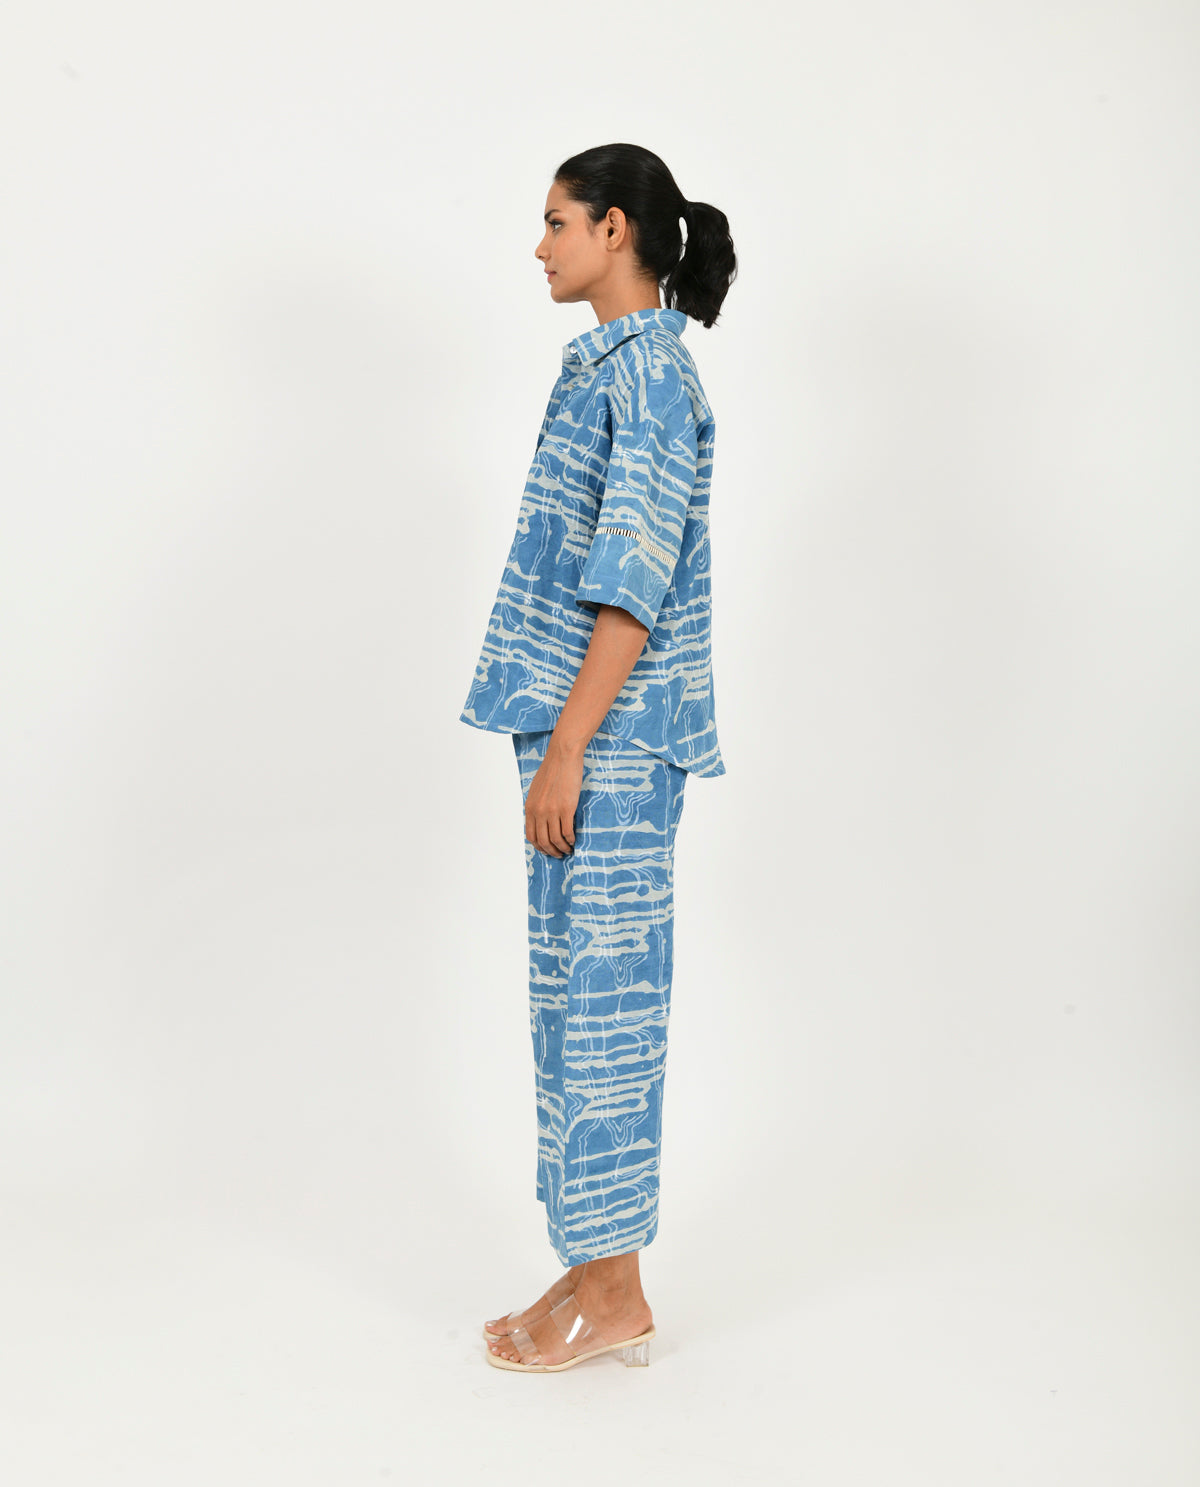 Blue Linen Co-ord Set by Rias Jaipur with Blue, Casual Wear, Co-ord Sets, Linen Blend, Natural, Prints, Relaxed Fit, Scribble Prints, Travel Co-ords, Womenswear, Yaadein, Yaadein by Rias Jaipur at Kamakhyaa for sustainable fashion